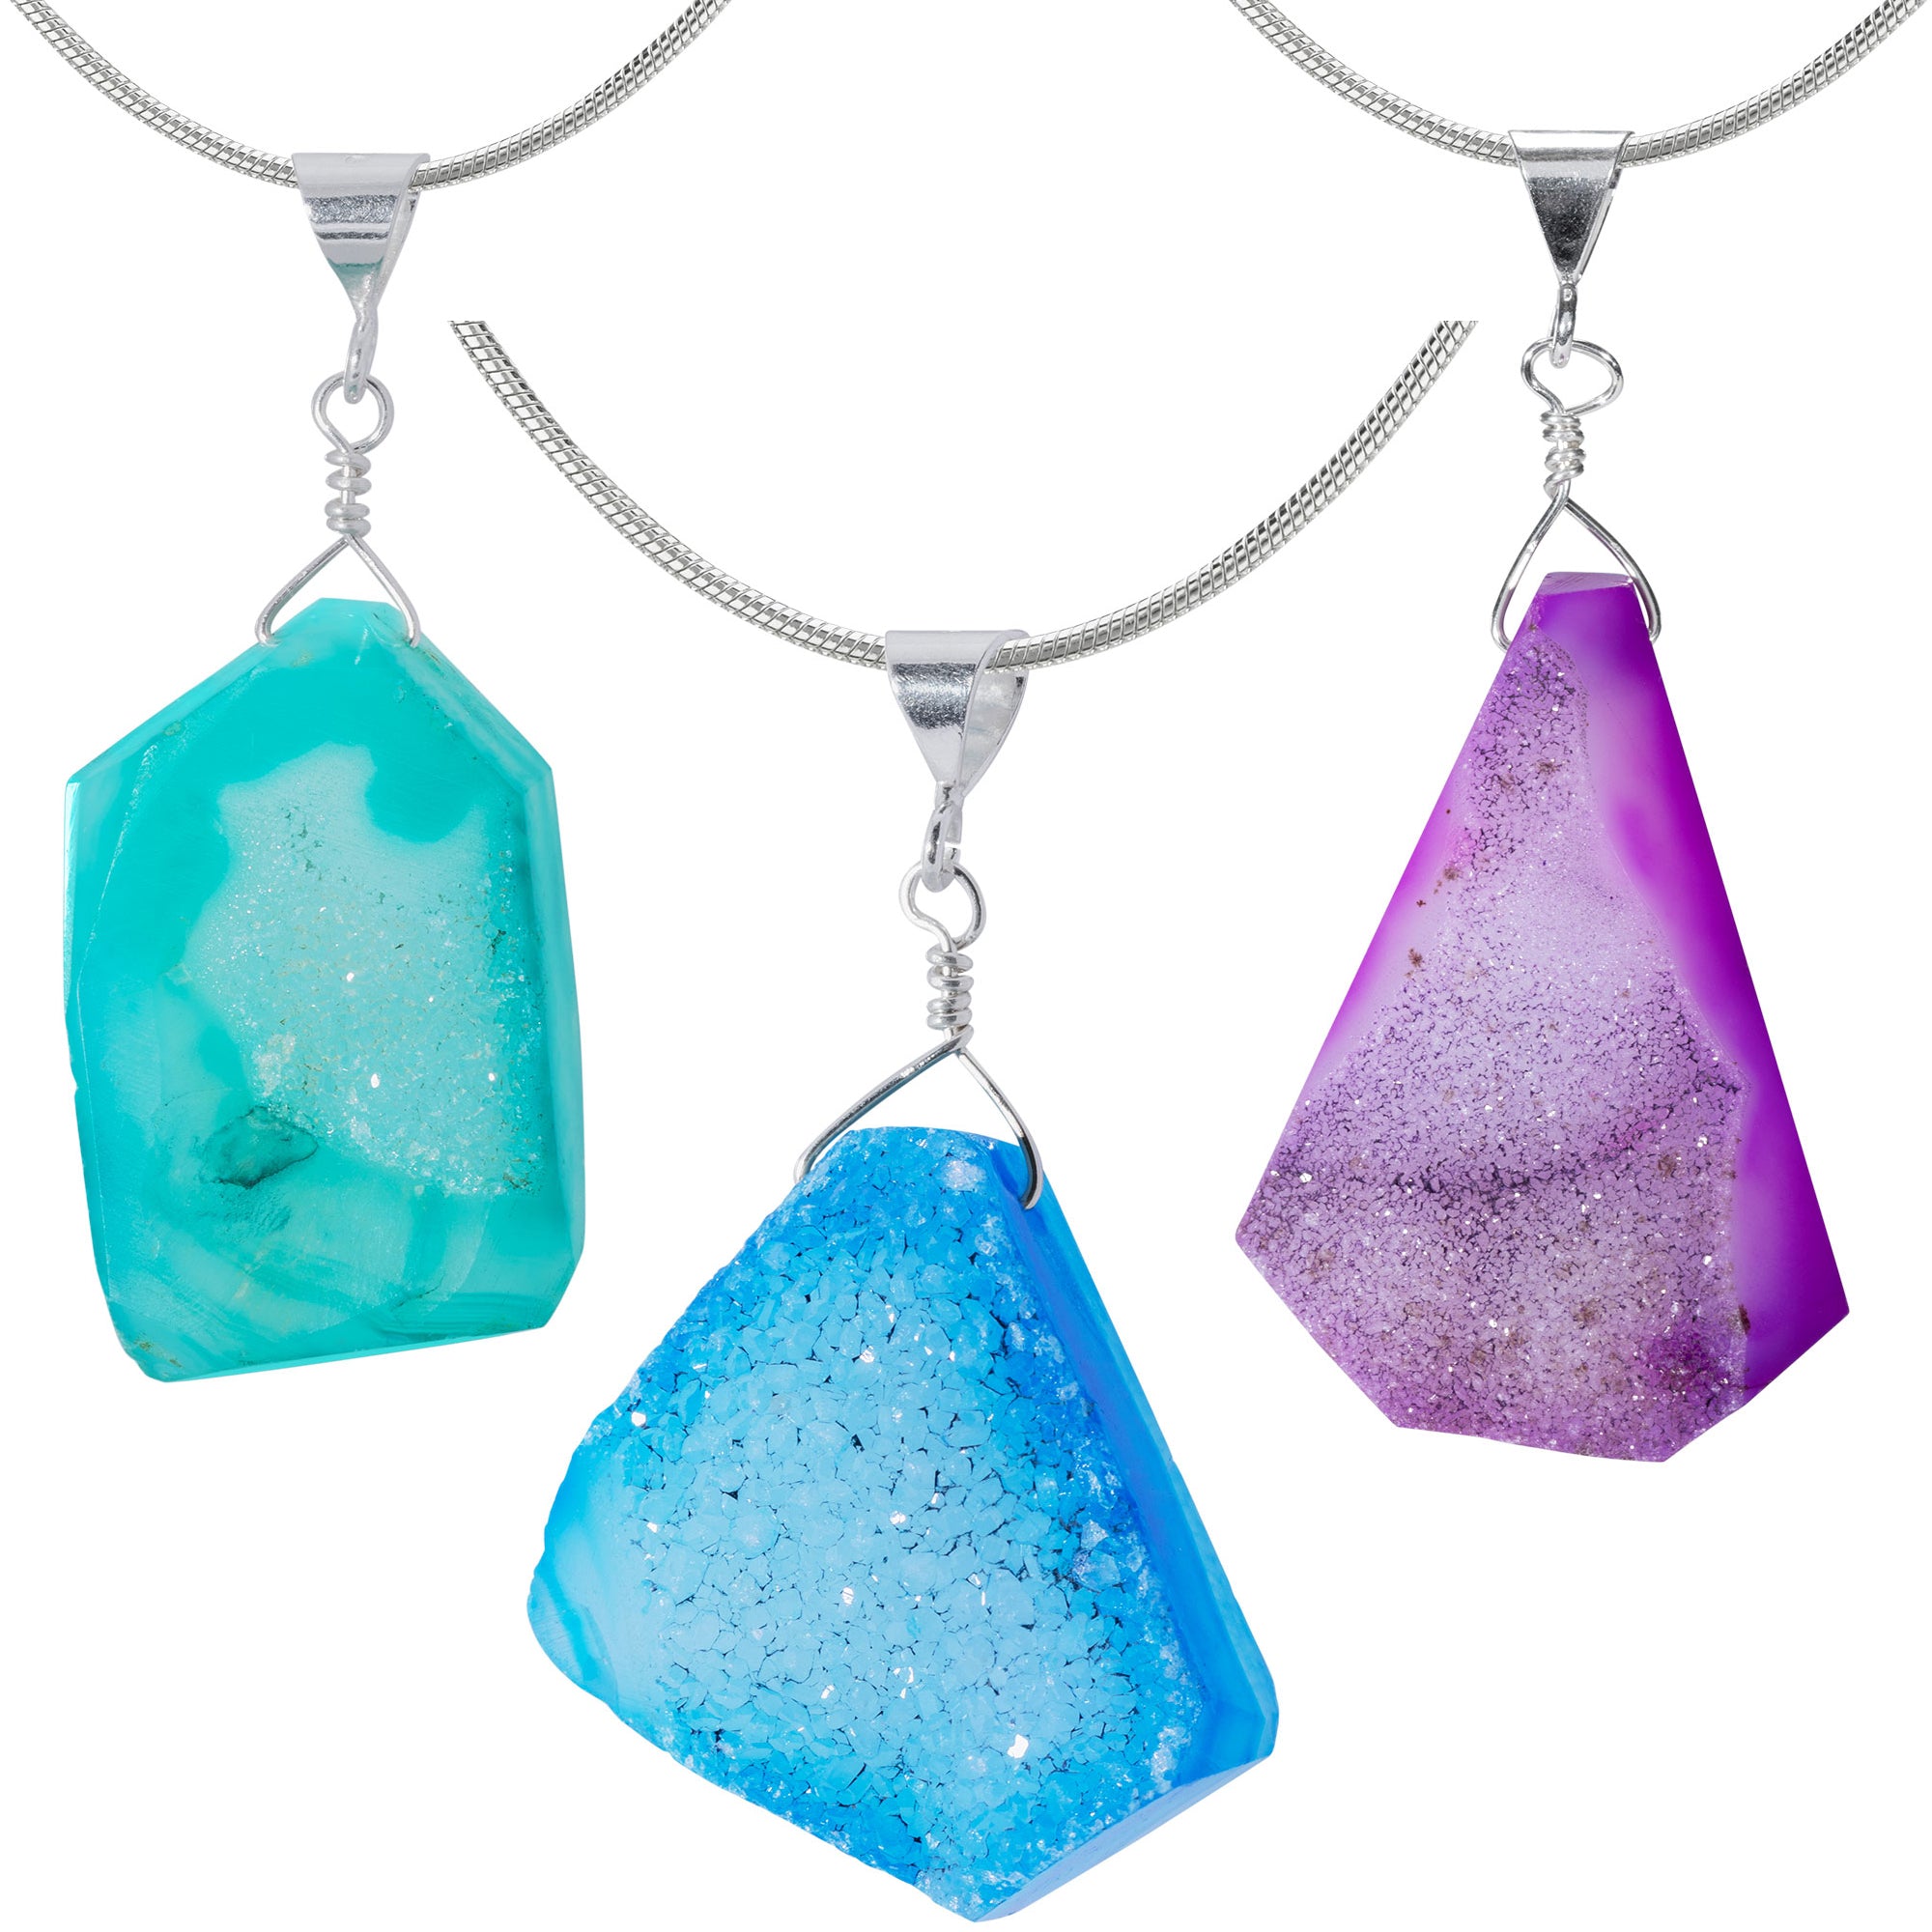 Cool Hues Sterling Silver & Druzy Necklace - Cobalt Blue - Pendant Only